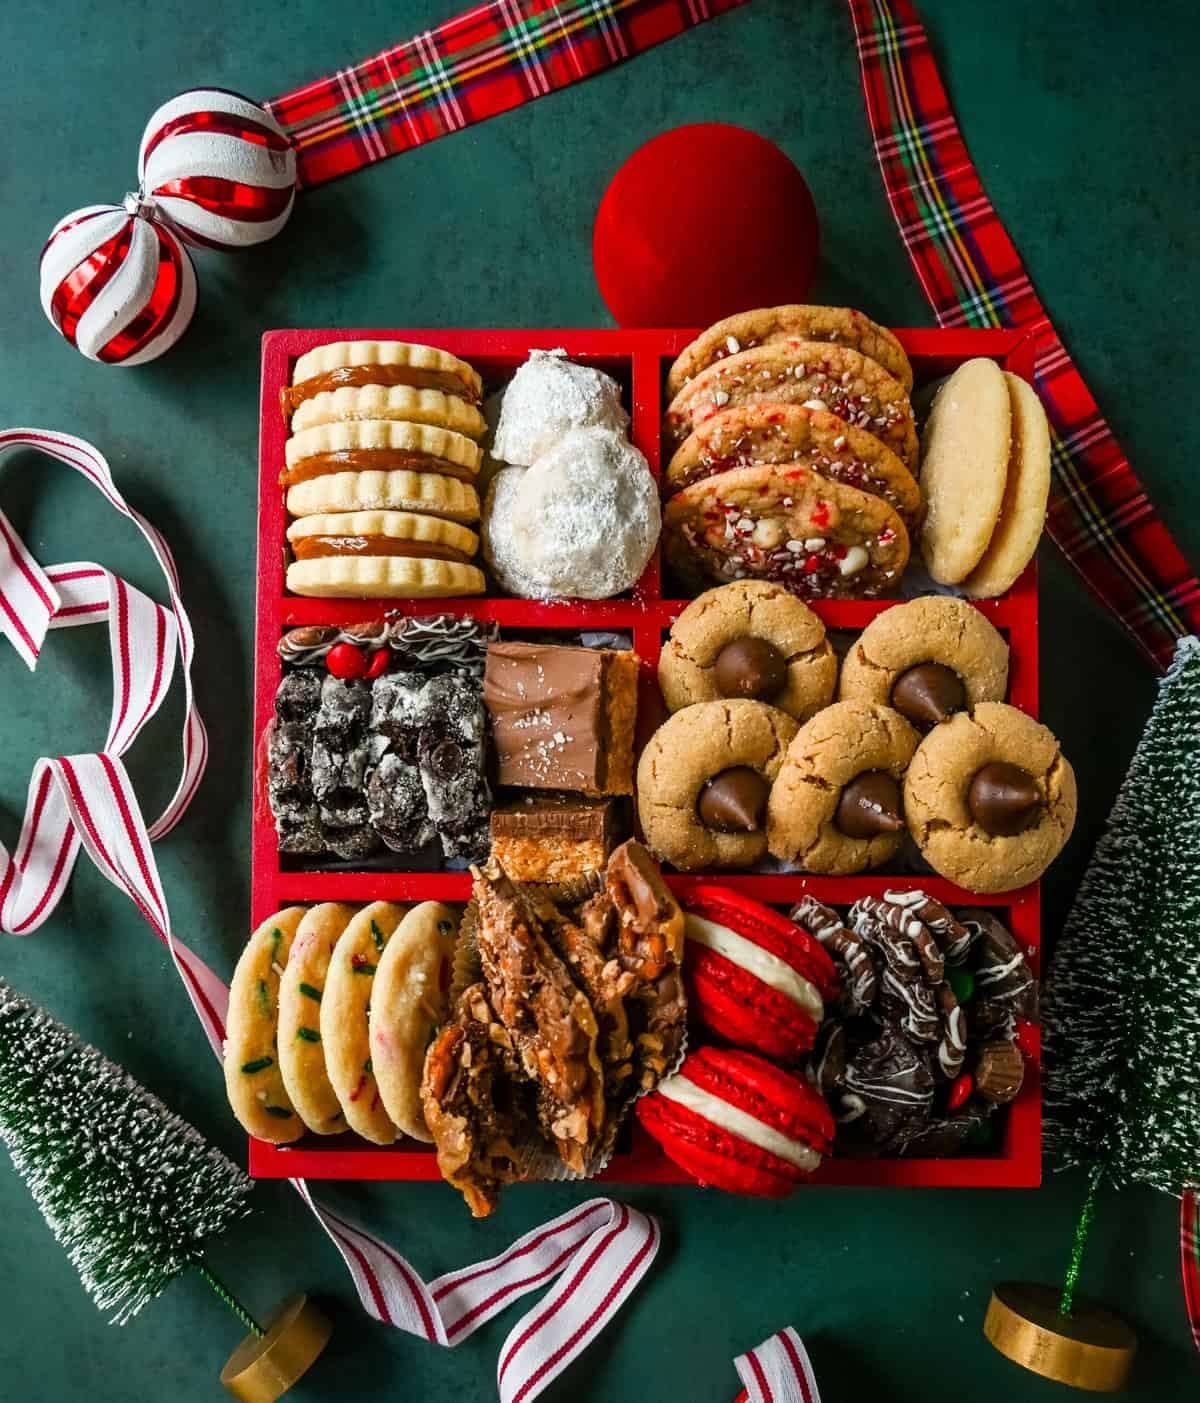 How to make a Christmas Cookie Box. Creating a Christmas cookie box is a wonderful way to spread holiday cheer and delight your friends and family with a variety of festive treats. Whether you're giving it as a gift or setting it out for guests to enjoy, a well-assembled cookie box can be a showstopper. 